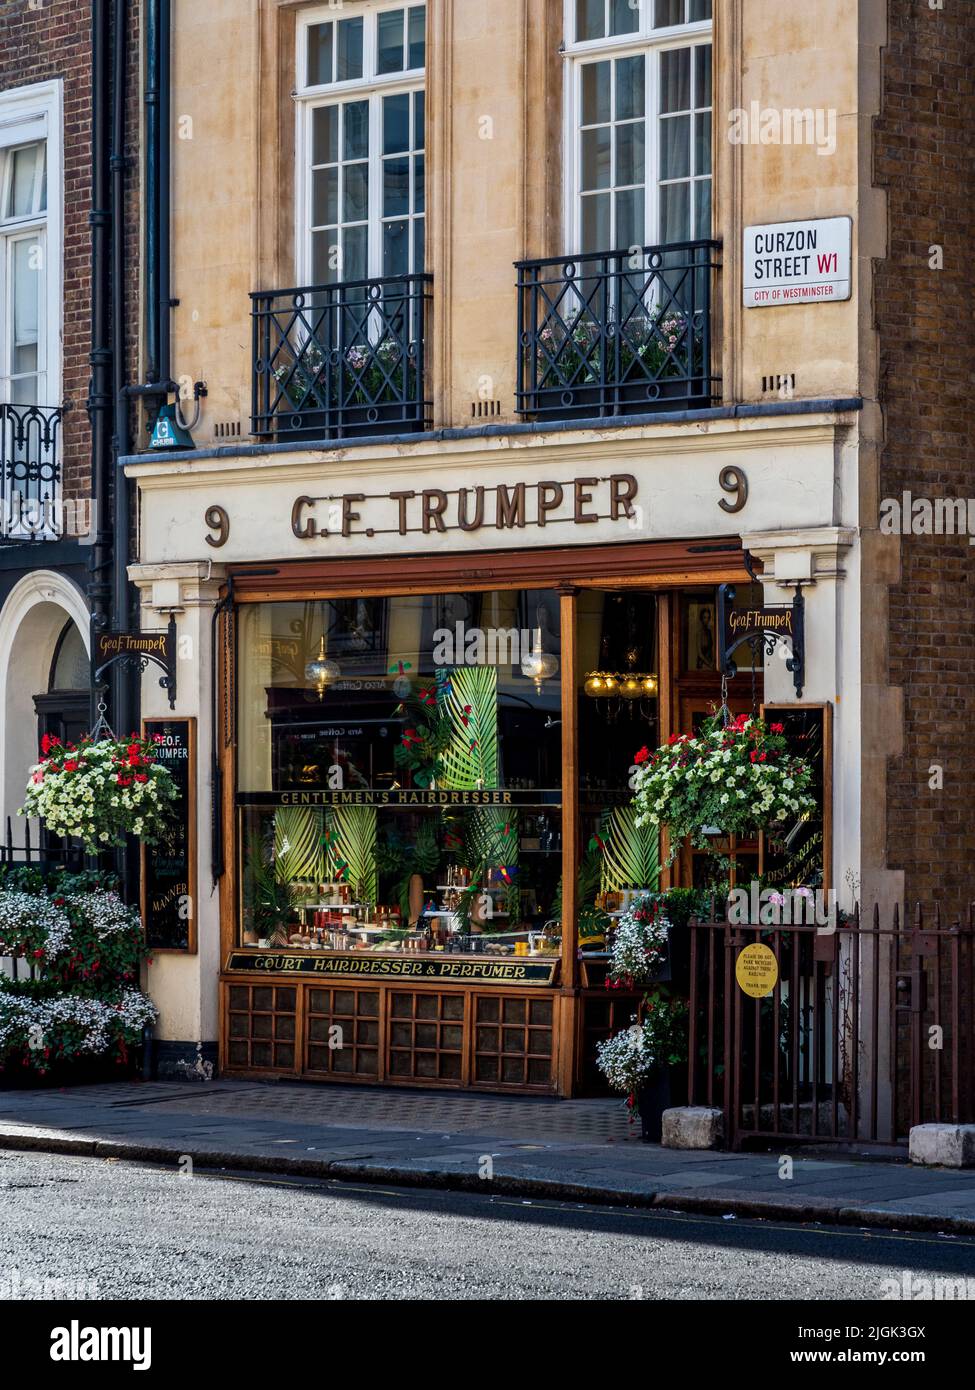 G F Trumper on Curzon St Mayfair London - George F Trumper or Geo. F. Trumper is a British men's barber, hairdresser & perfumer founded 1875, London. Stock Photo